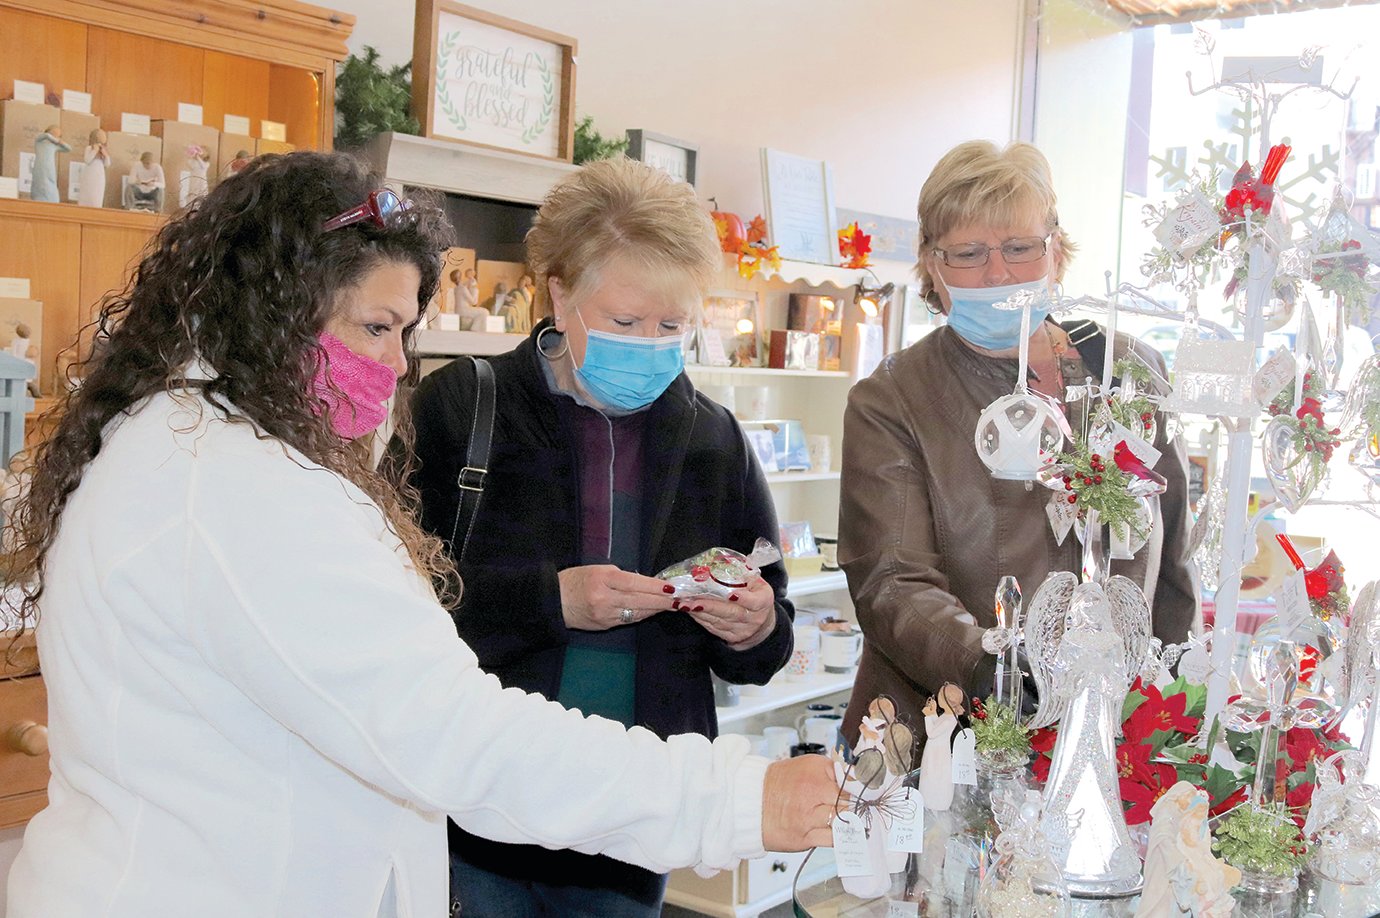 Holiday shoppers Karla Patty Murray, from left, Tammy Whetzel and Karla Jackson peruse items at In His Time downtown Friday afternoon.